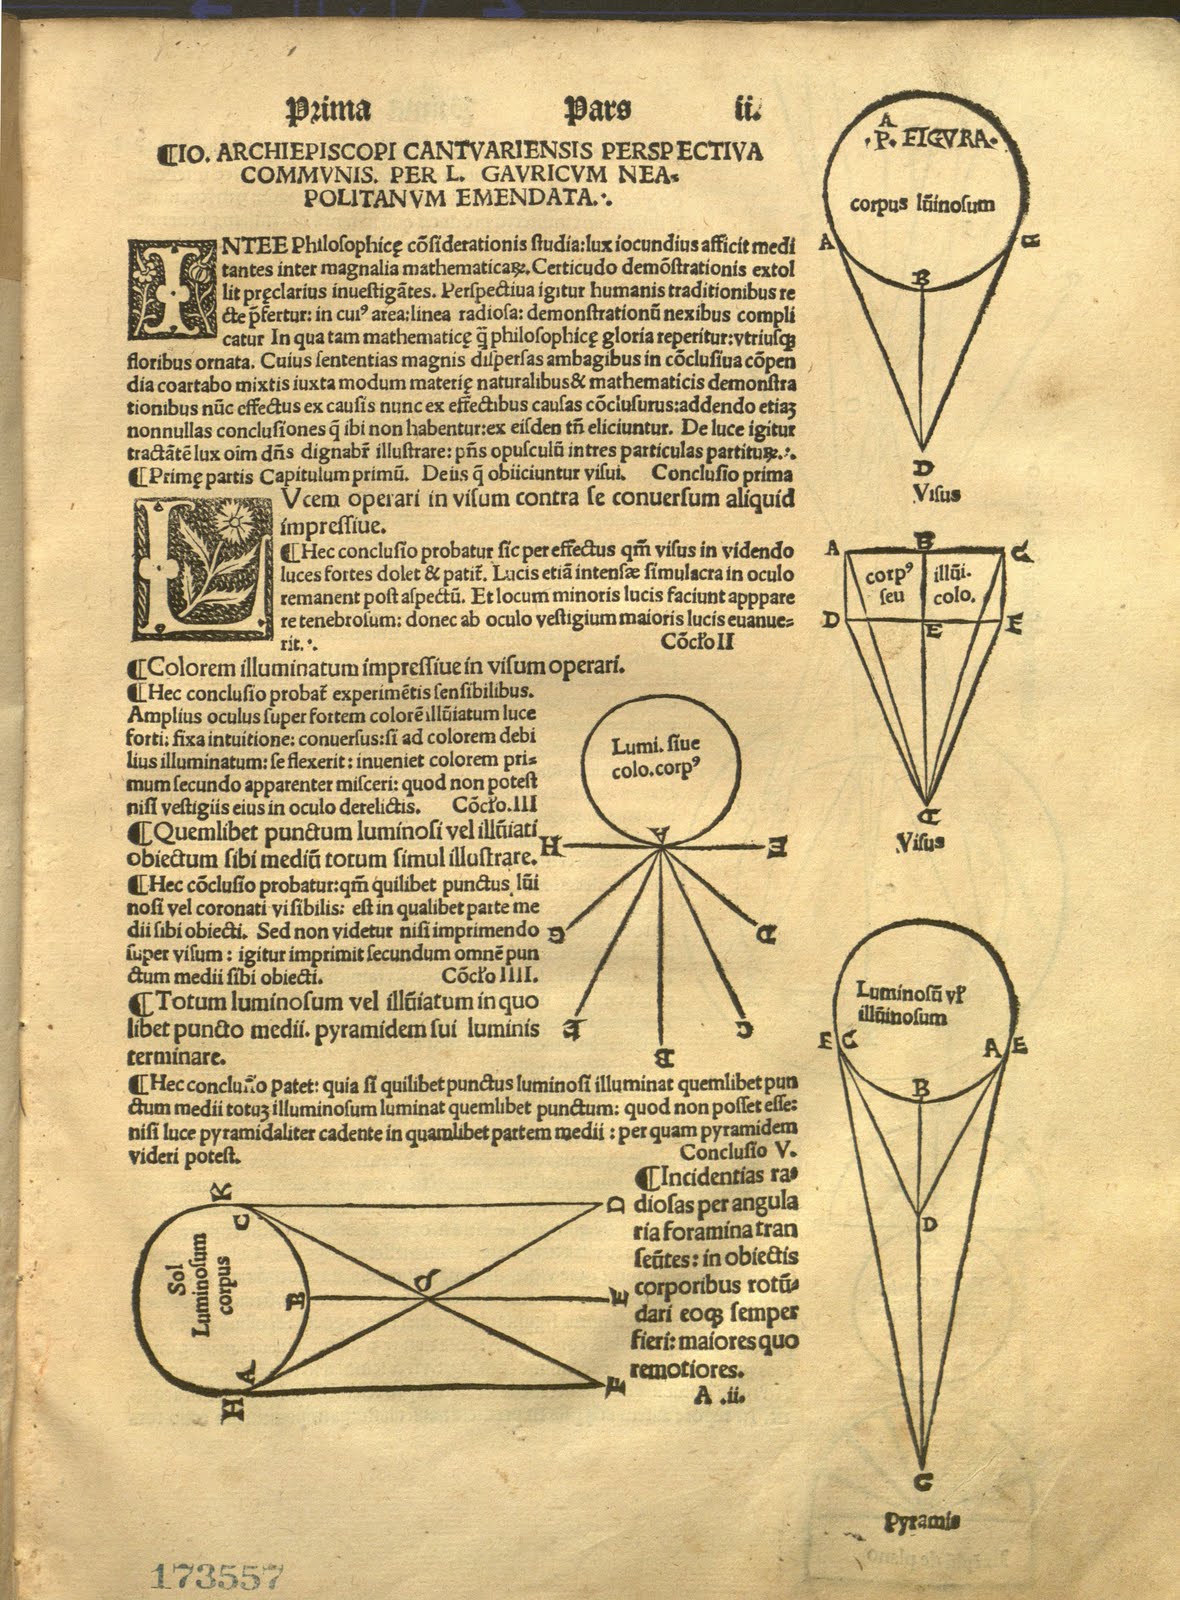 page from Perspectiva Communis with diagrams and illustrated initial capital letters at the beginning of paragraphs